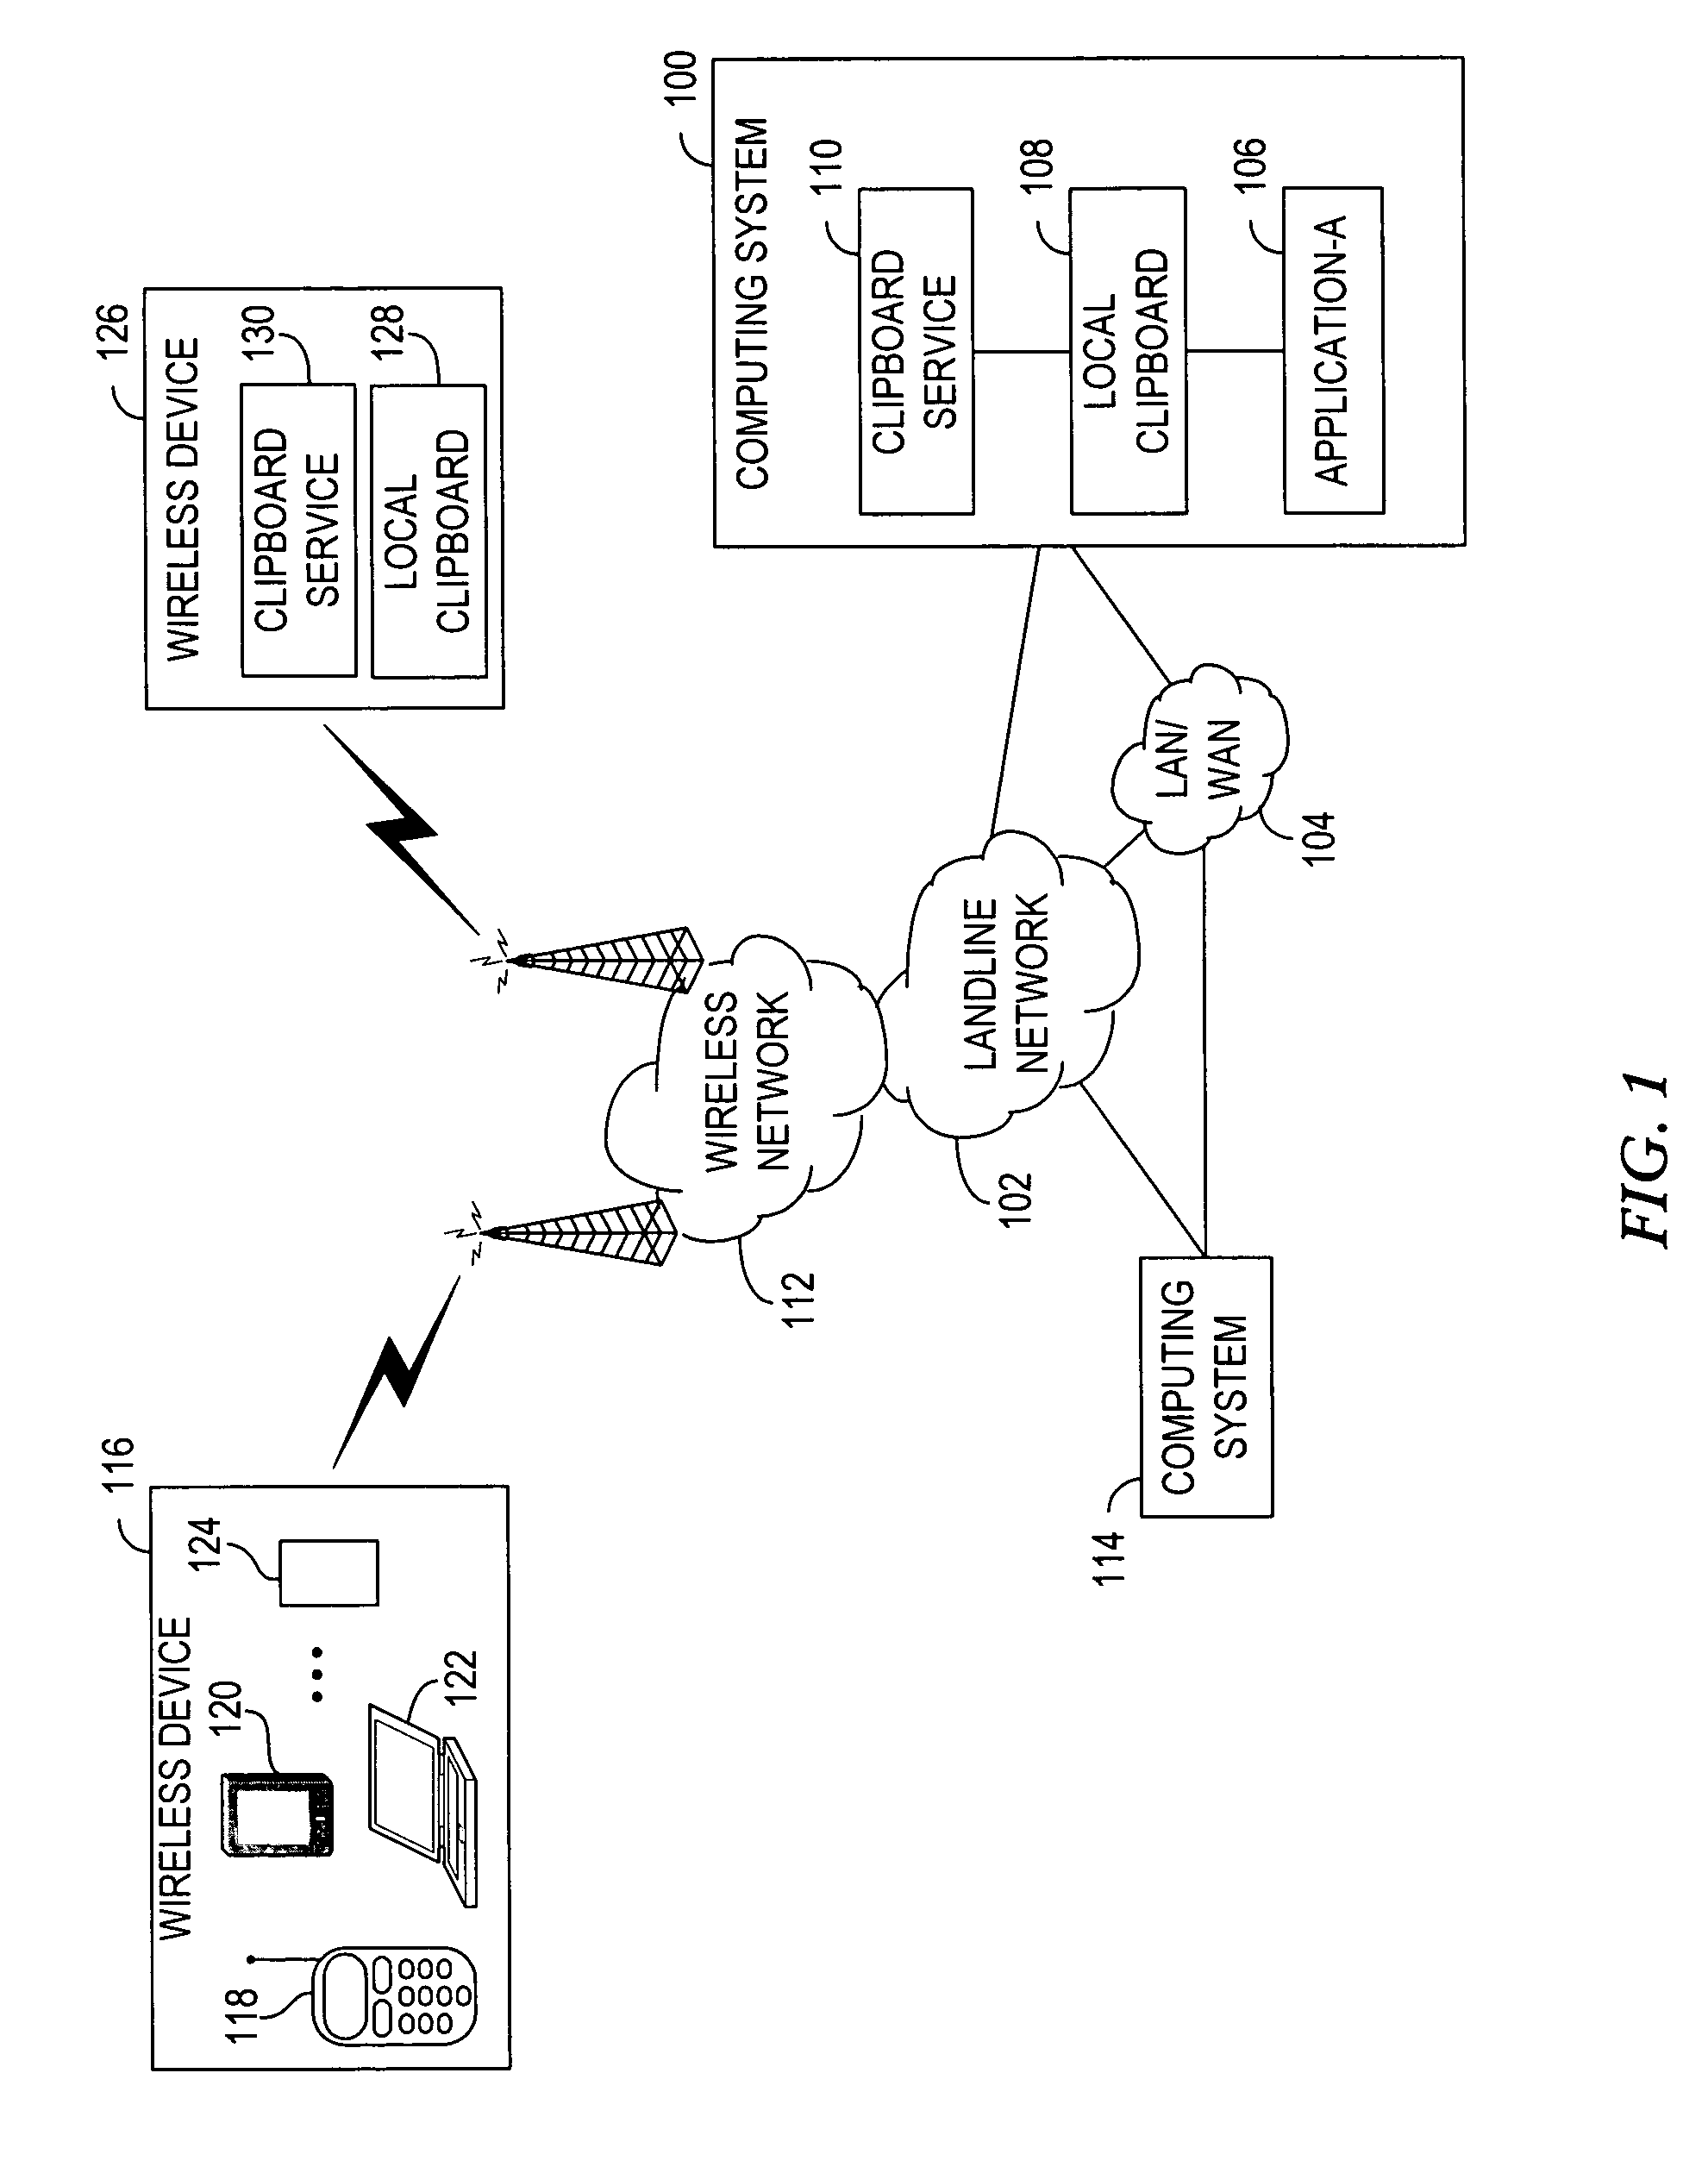 System and method for exposing local clipboard functionality towards external applications